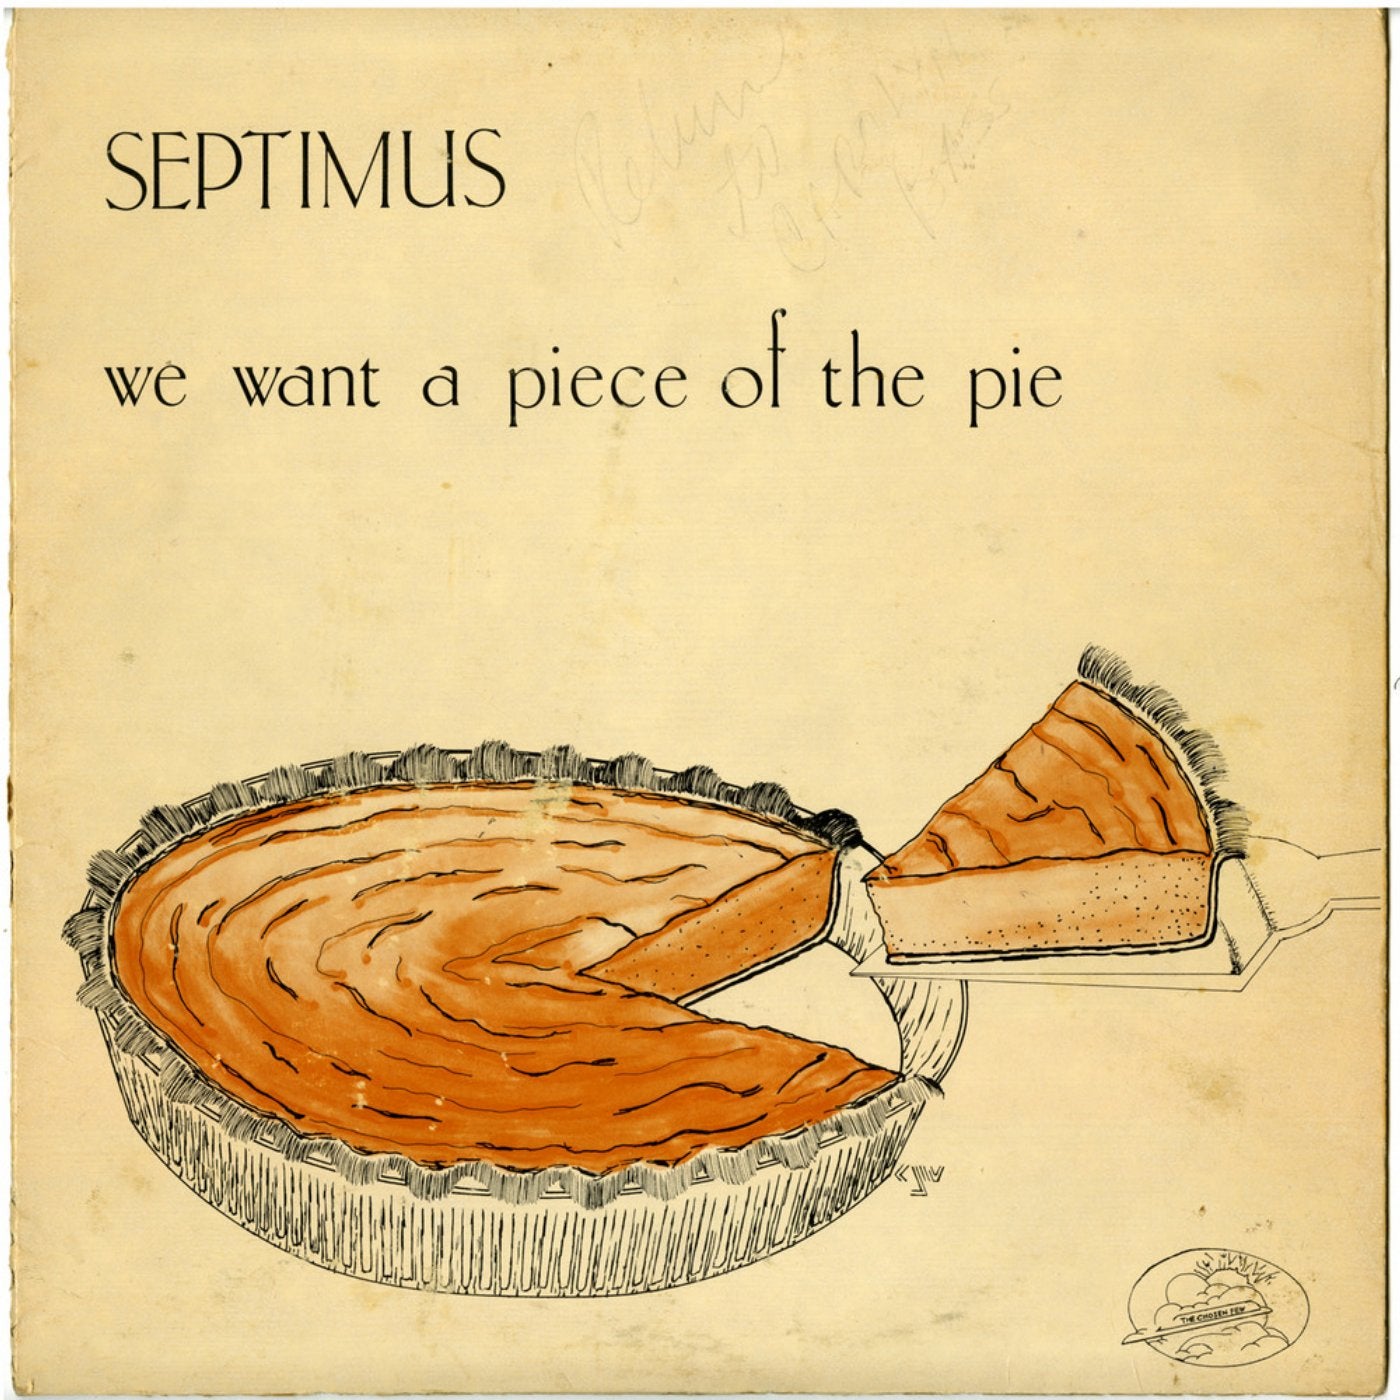 We Want a Piece of the Pie